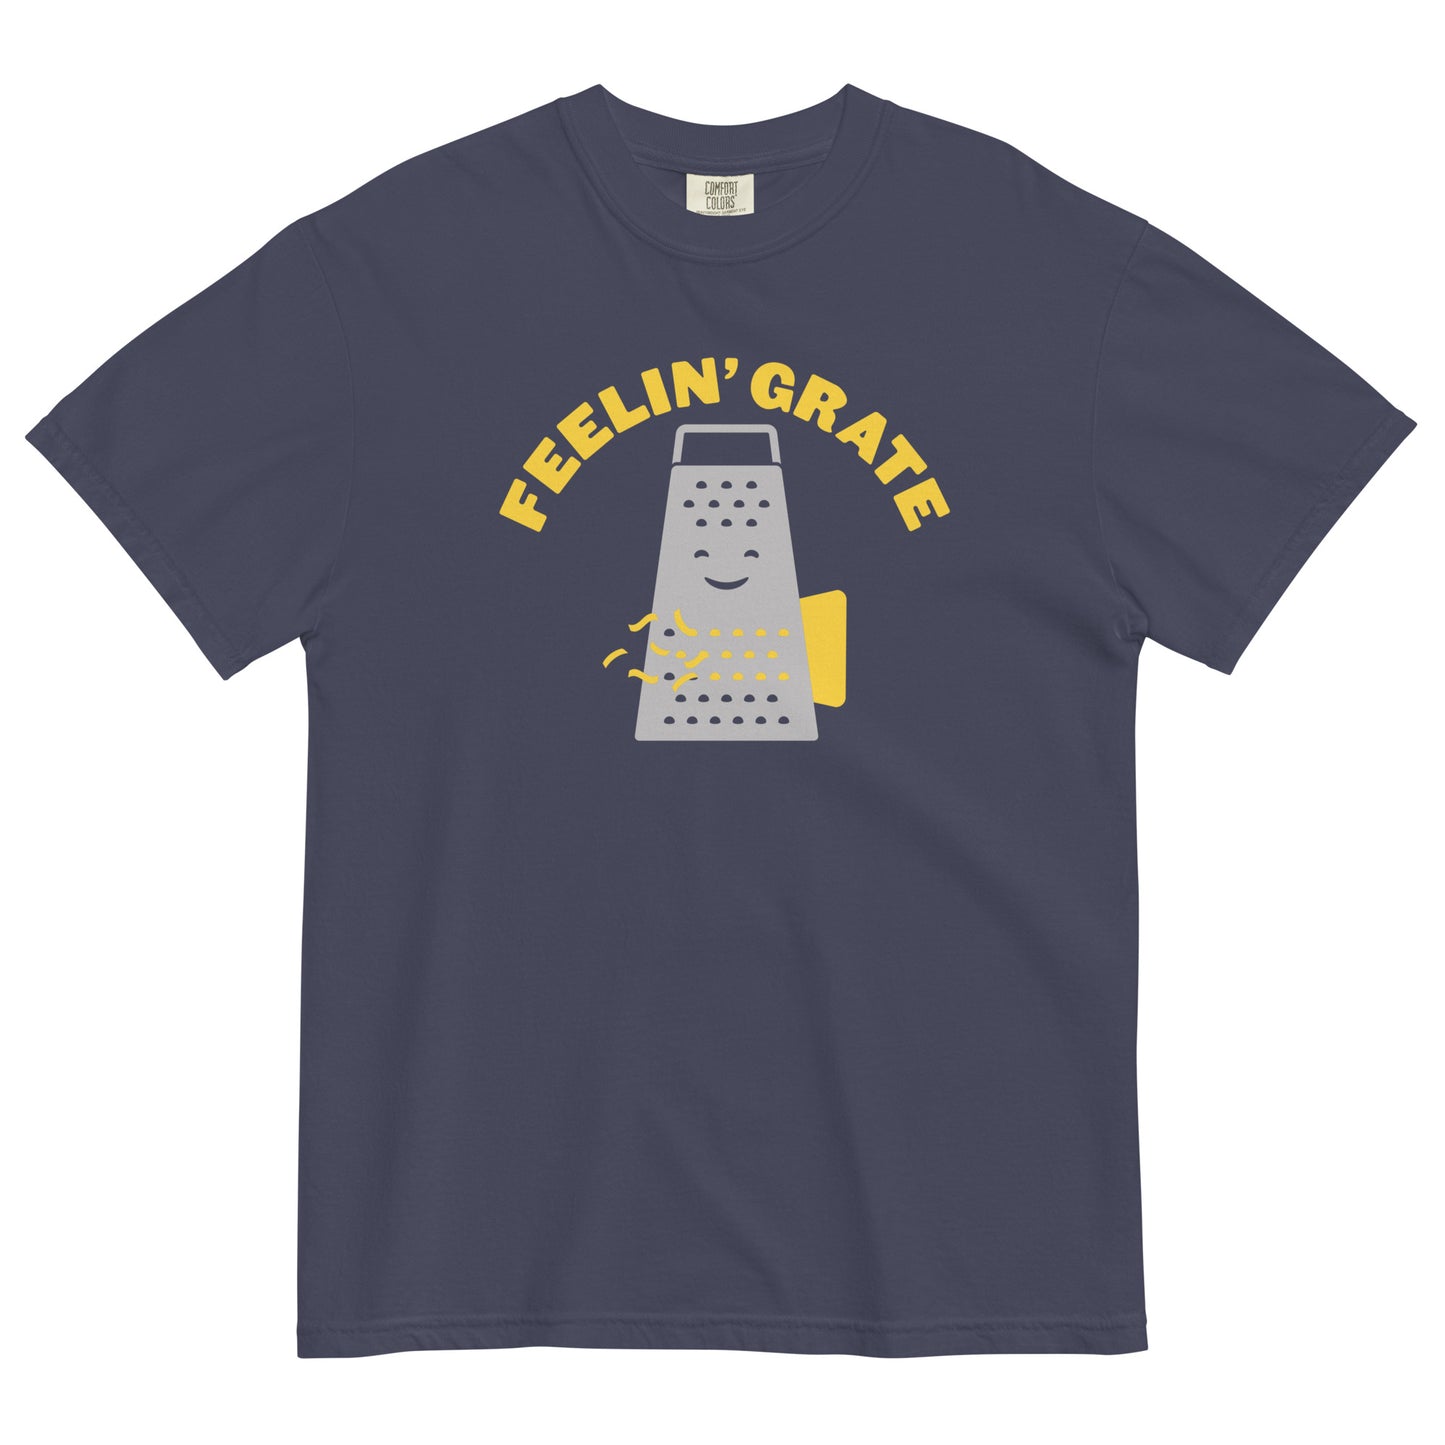 Feelin' Grate Men's Relaxed Fit Tee